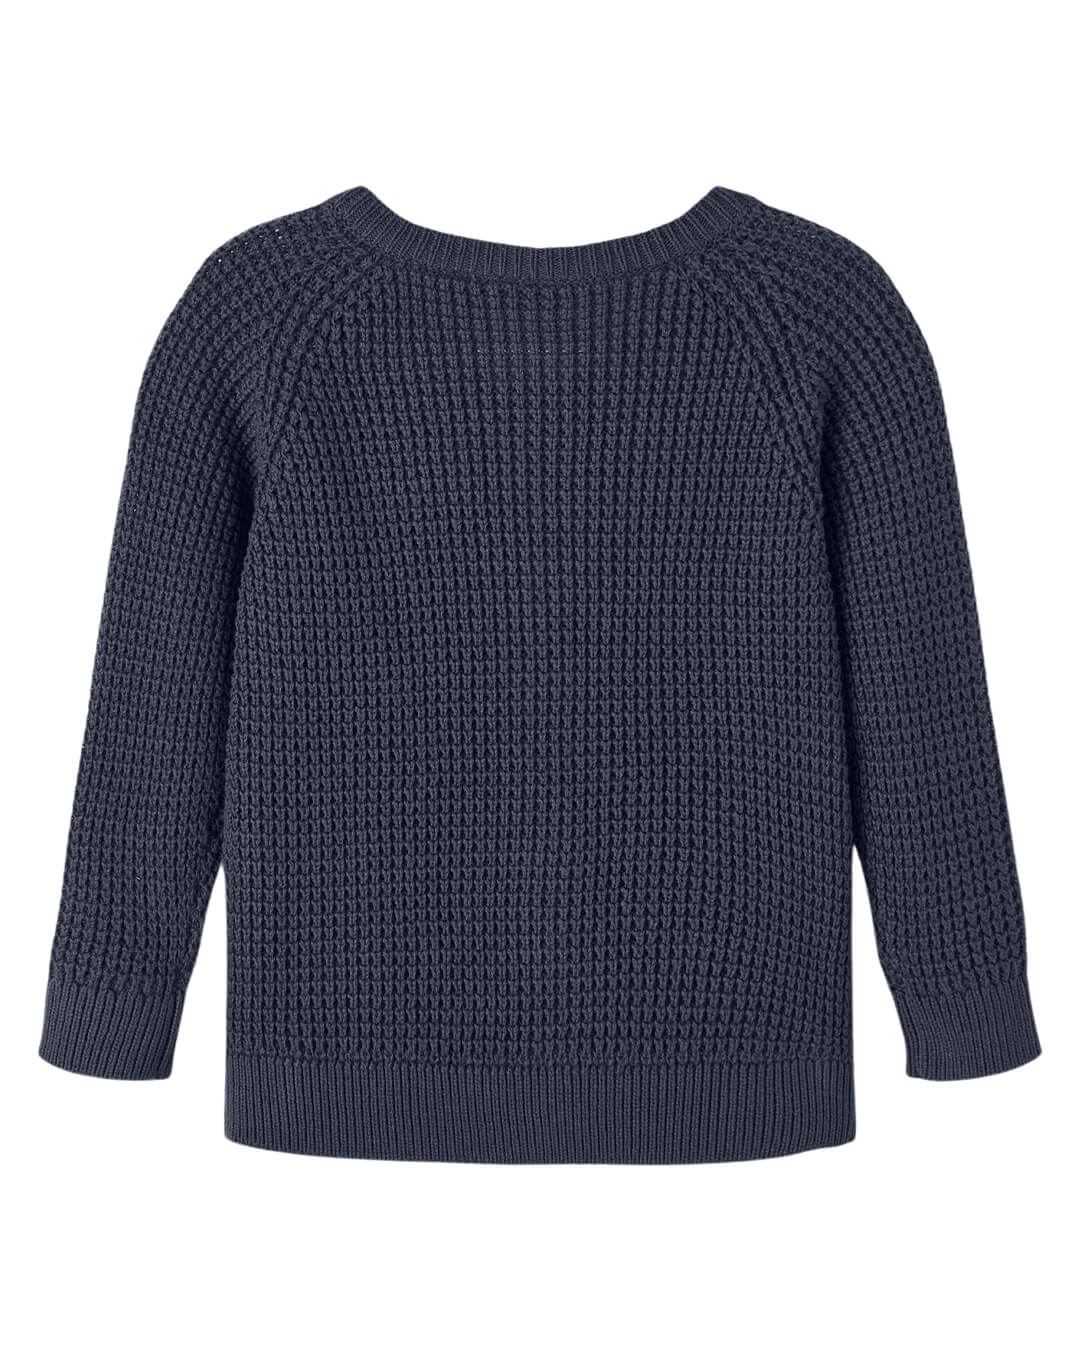 Name It Jumpers Name It Mlosalle Navy Jumper